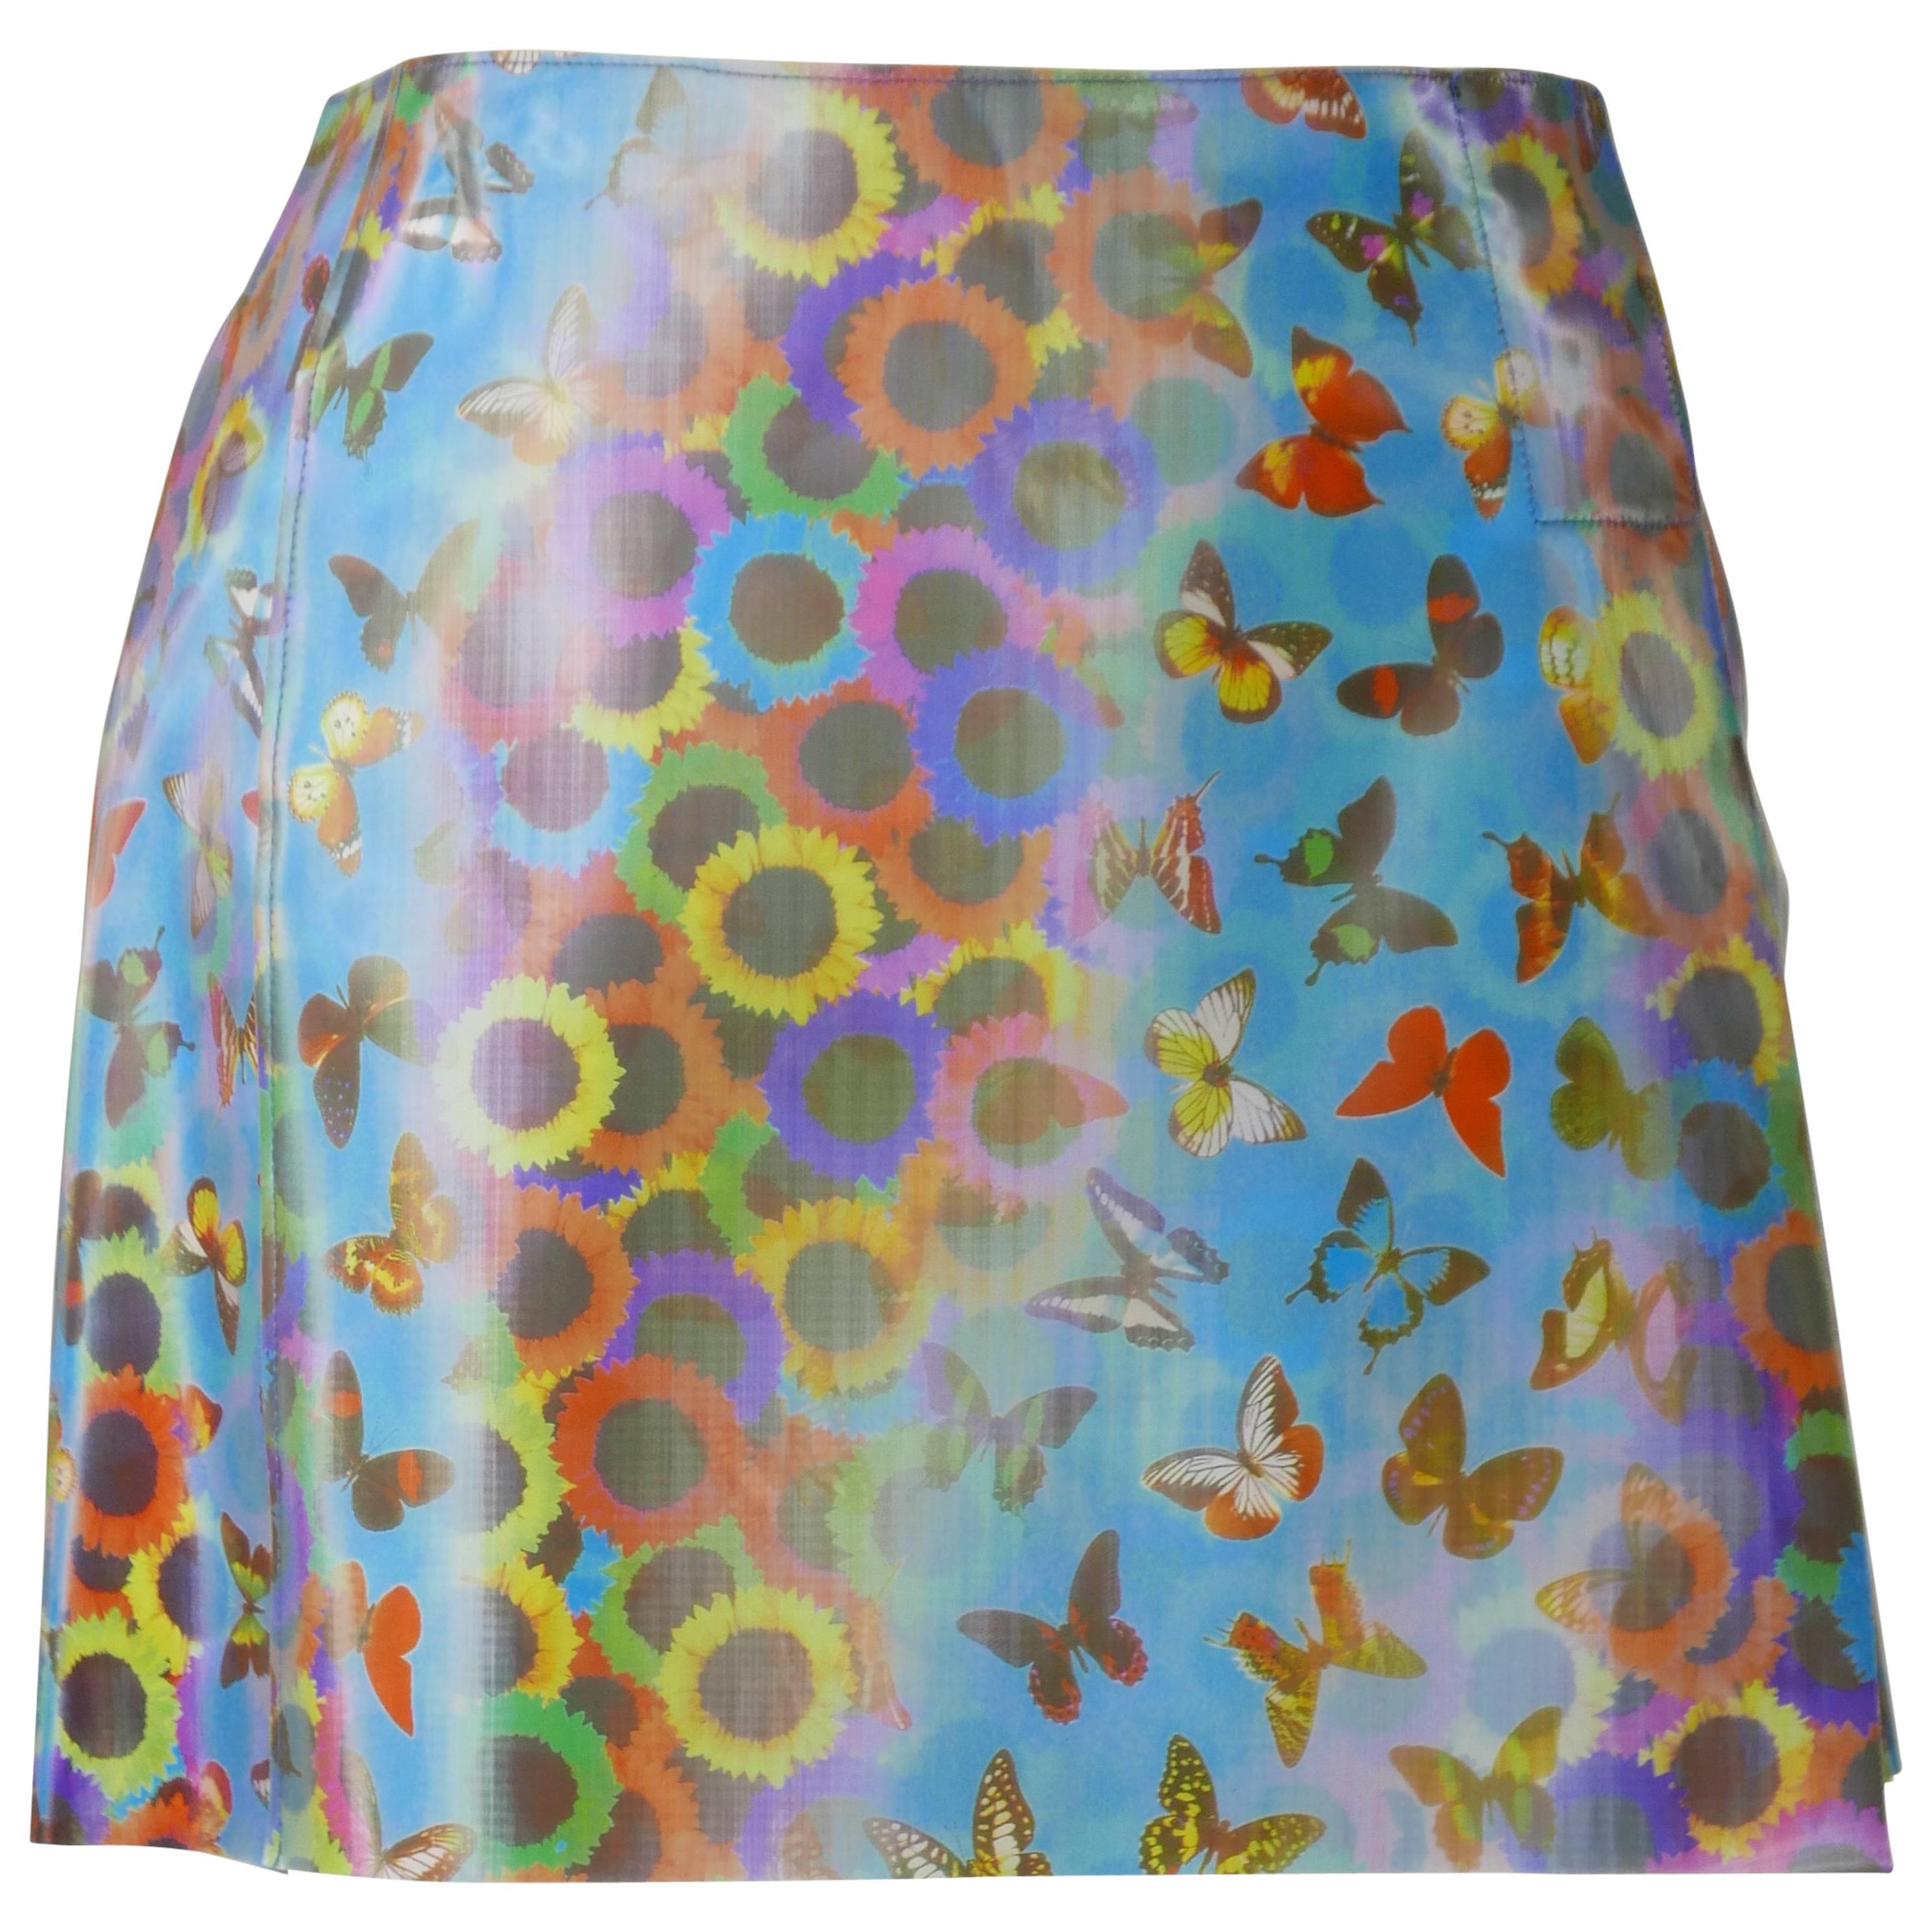 DOLCE & GABBANA Holographic Butterfly and Sunflowers PVC Mini Skirt